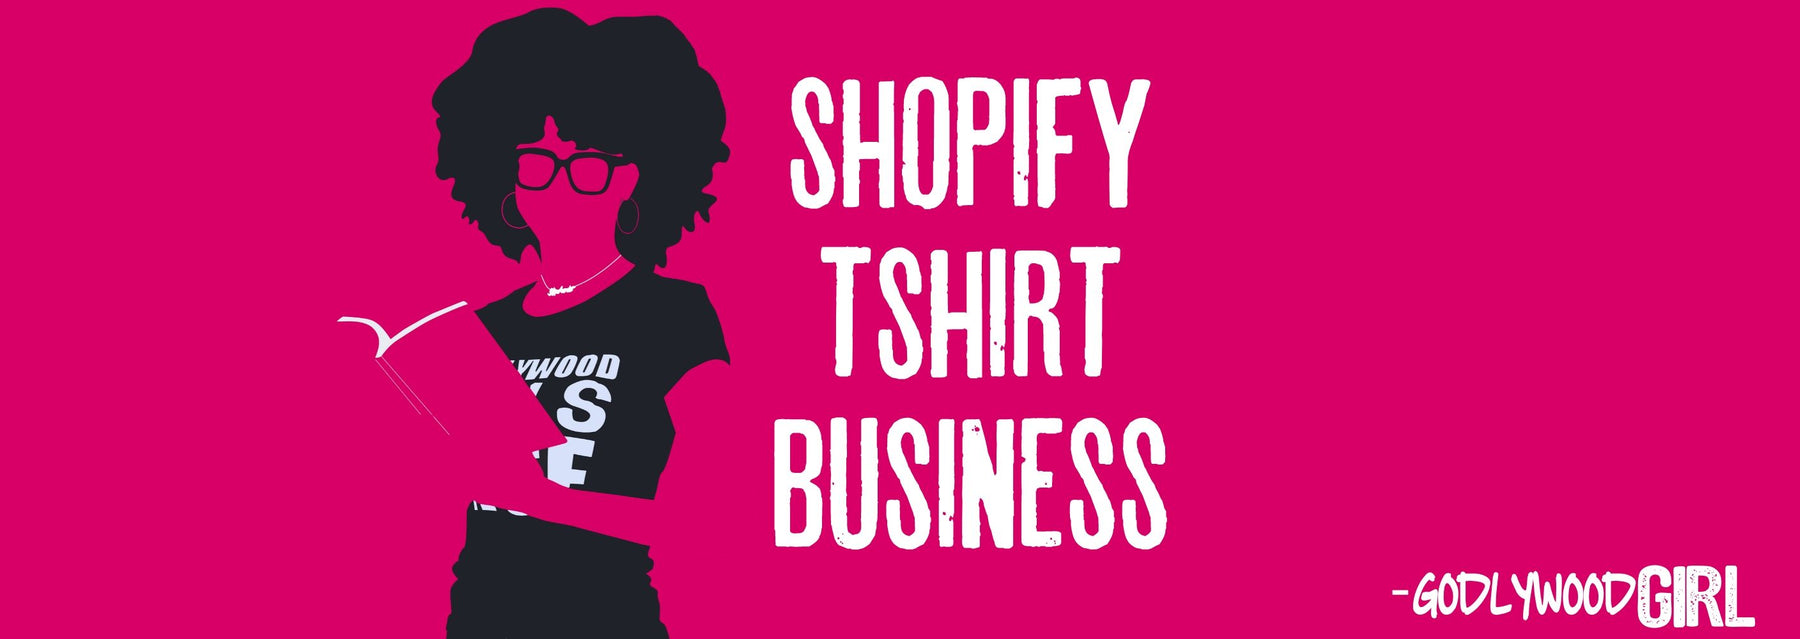 HOW TO START A T-SHIRT BUSINESS ONLINE WITH SHOPIFY PRINT-ON-DEMAND | Christian Entrepreneur Series